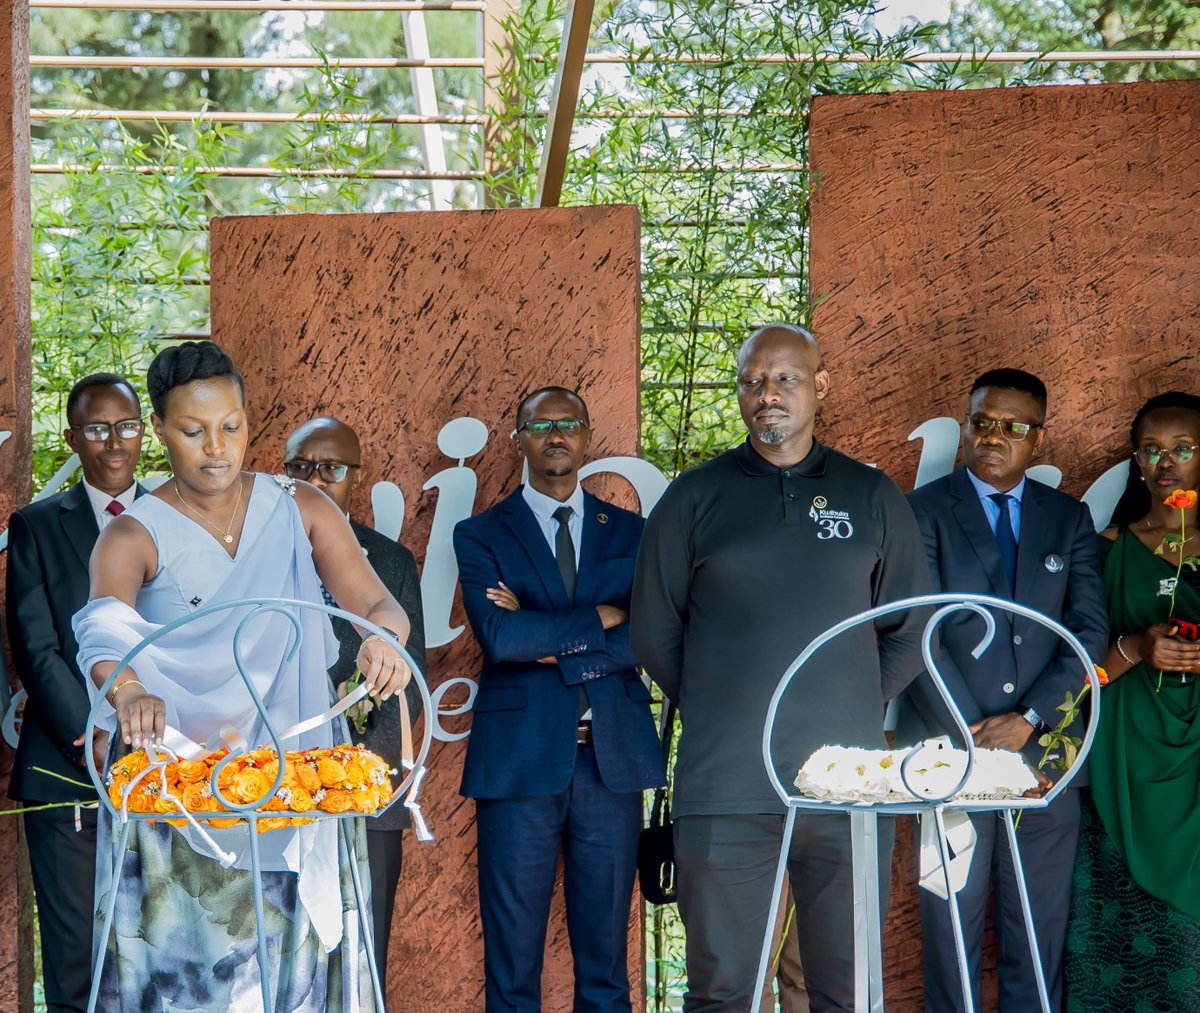 Earlier today, our Centre President, Prof. @samysk, joined @Rwanda_Edu to commemorate employees of the former MINEPRISEC, MINESUPRESS, and other agencies who lost their lives in the 1994 genocide against the Tutsi. We honor their memory and stand united in remembrance. #Kwibuka30